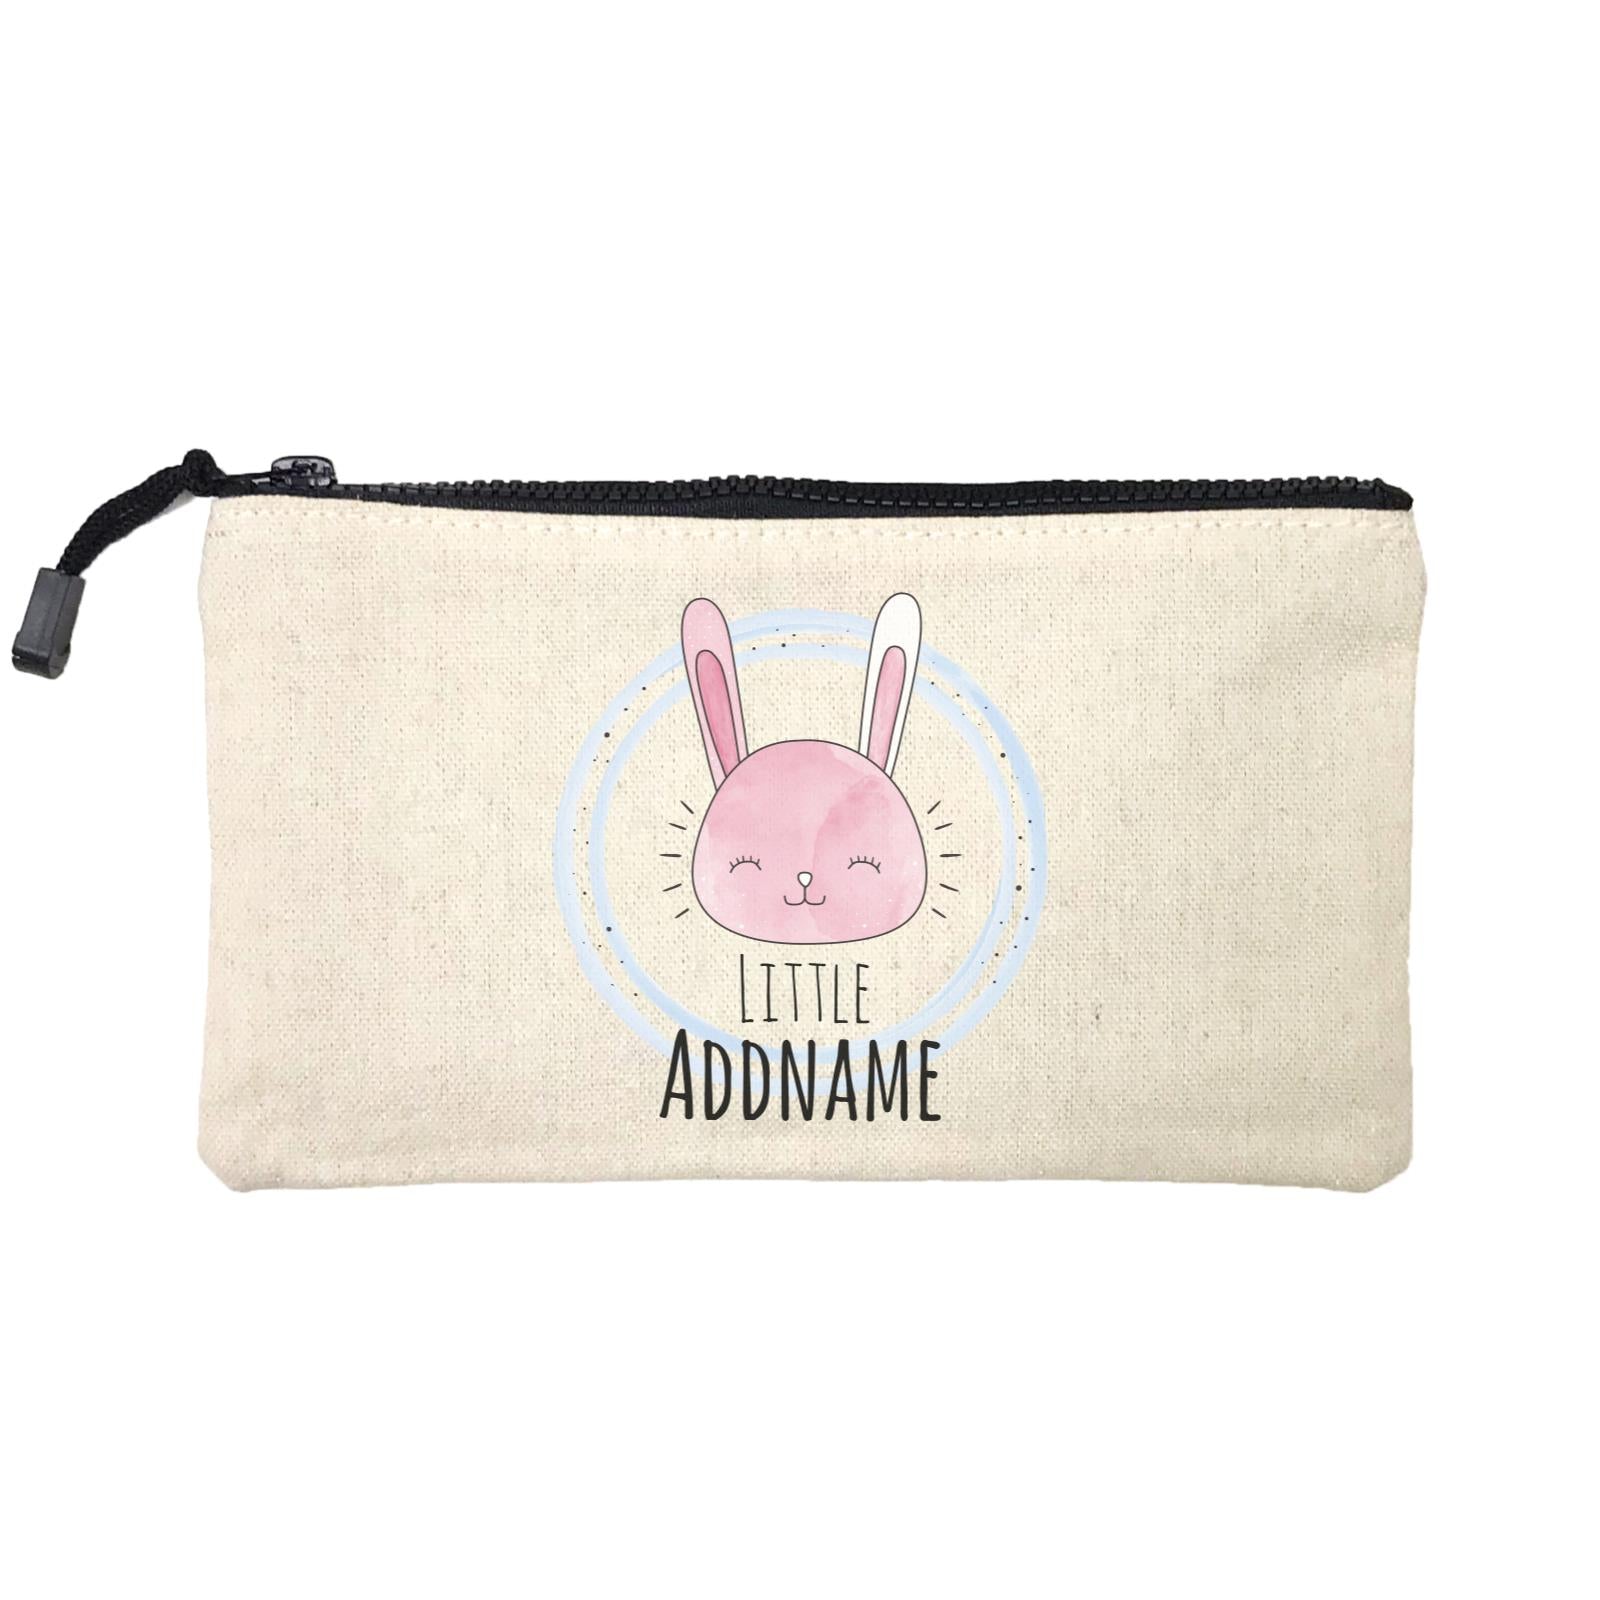 Drawn Adorable Animals Little Rabbit Addname Mini Accessories Stationery Pouch